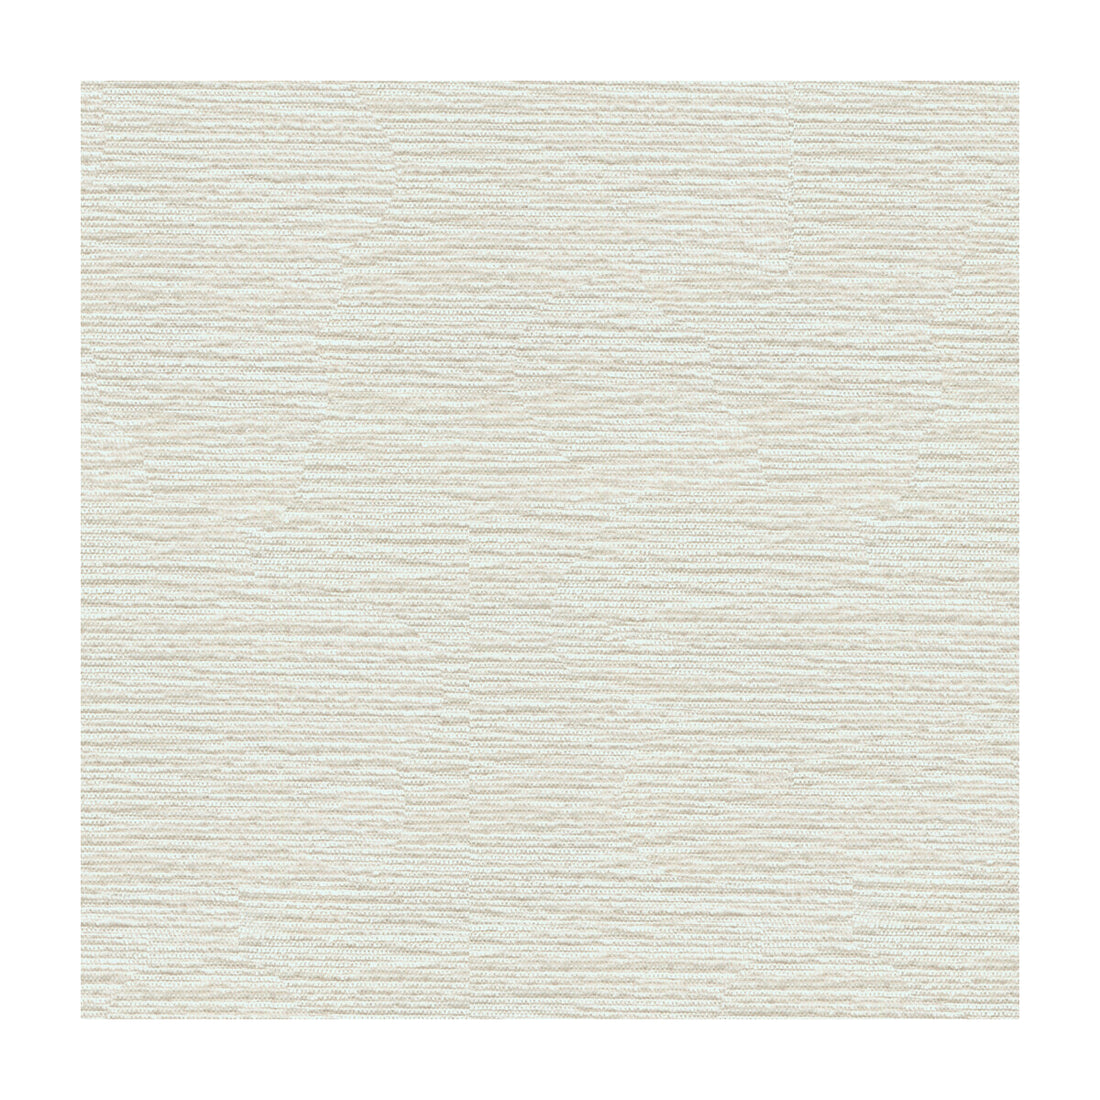 Portside fabric in ivory color - pattern 34866.101.0 - by Kravet Design in the Oceania Indoor Outdoor collection